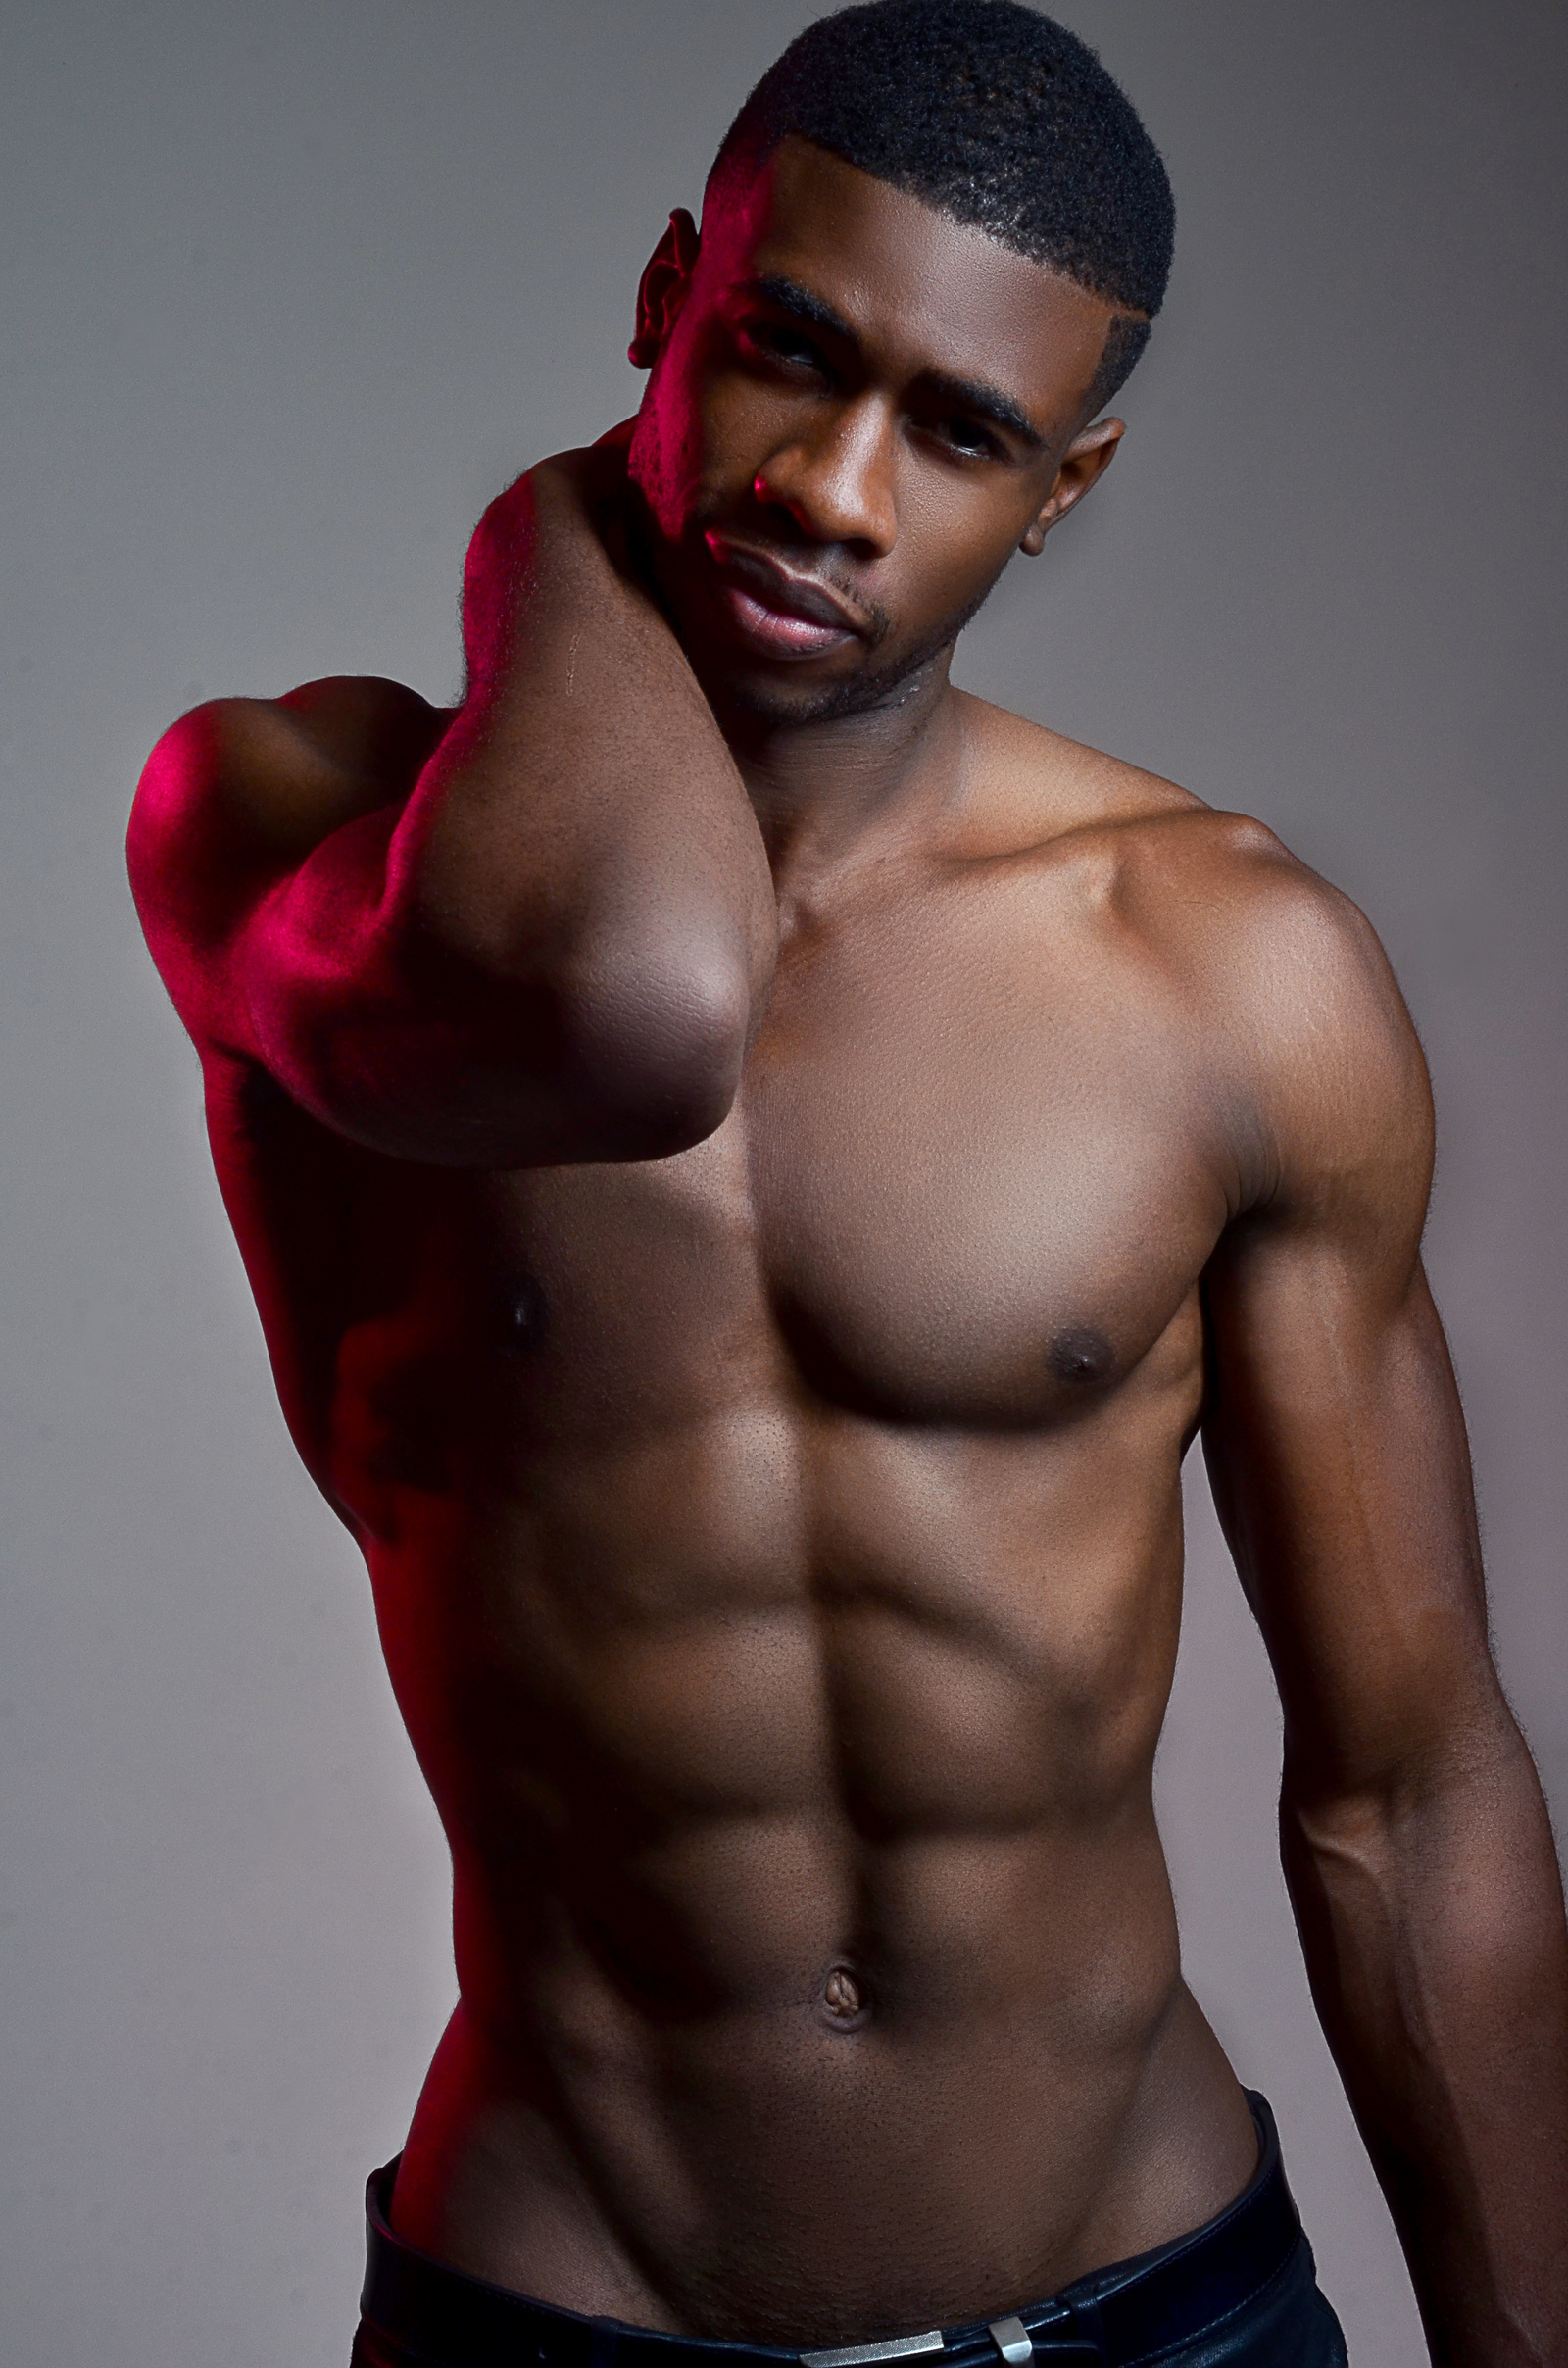 4K Black Male Model Wallpapers High Quality D